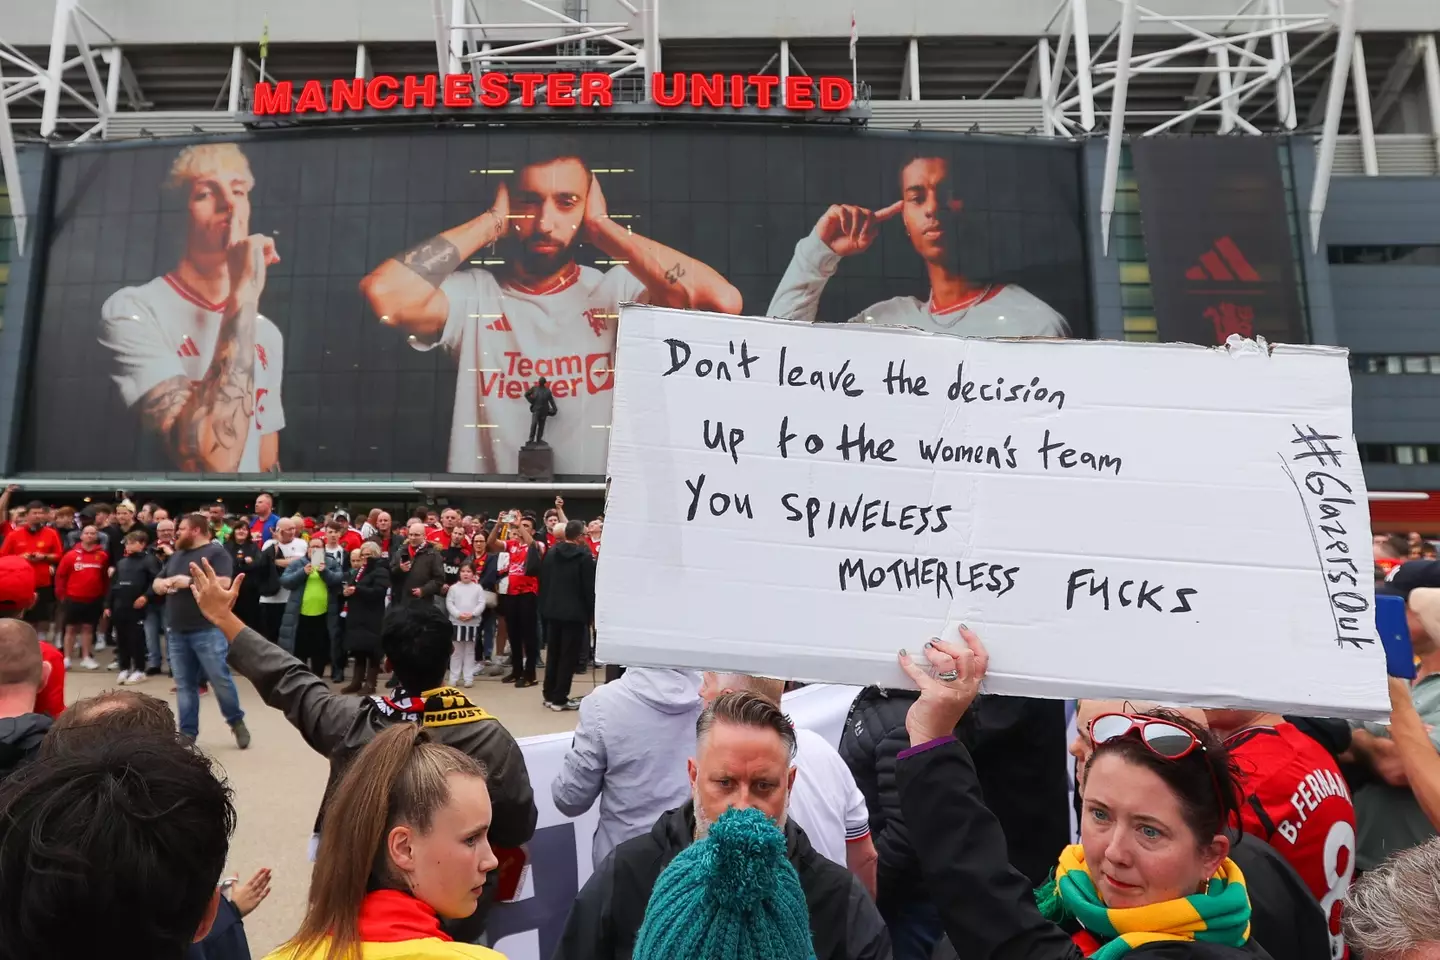 Manchester United fans holds up banner protesting against Mason Greenwood Image: Getty